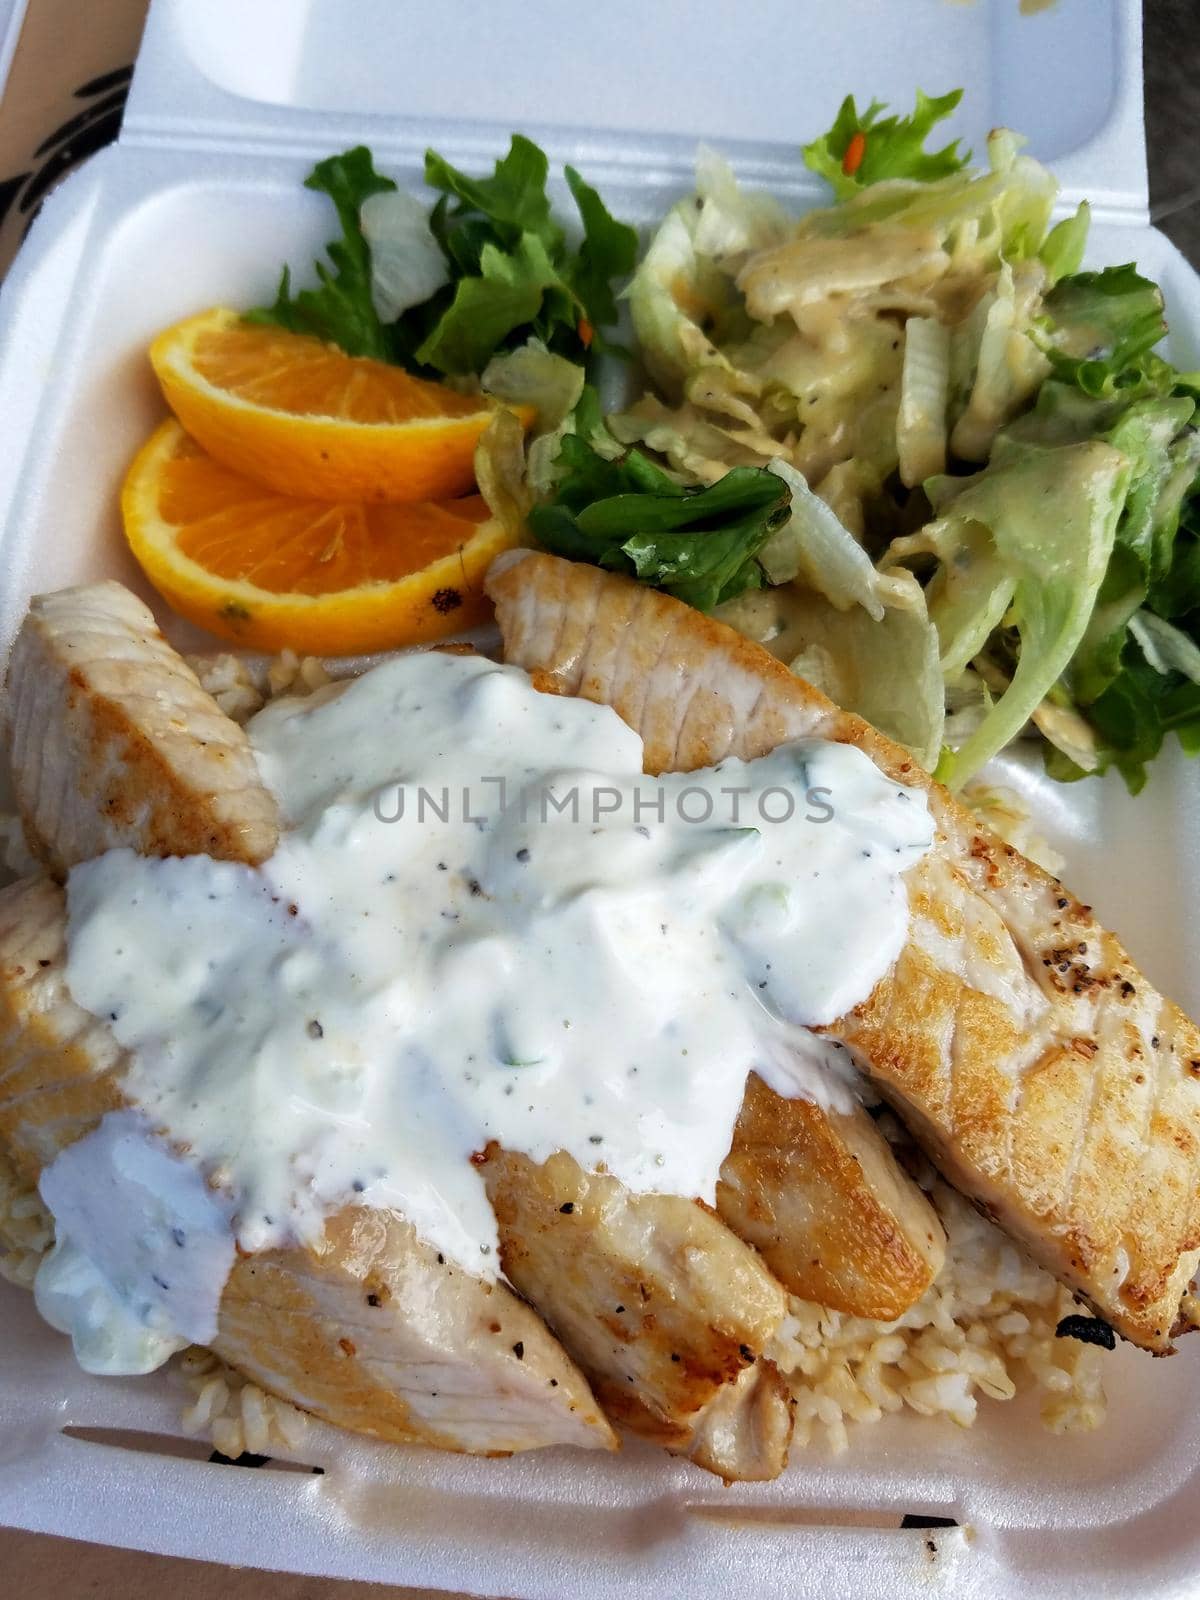 Fish Plate Lunch covered in white sauce with Brown Rice, Orange Slices, and Salad in Styrofoam container.